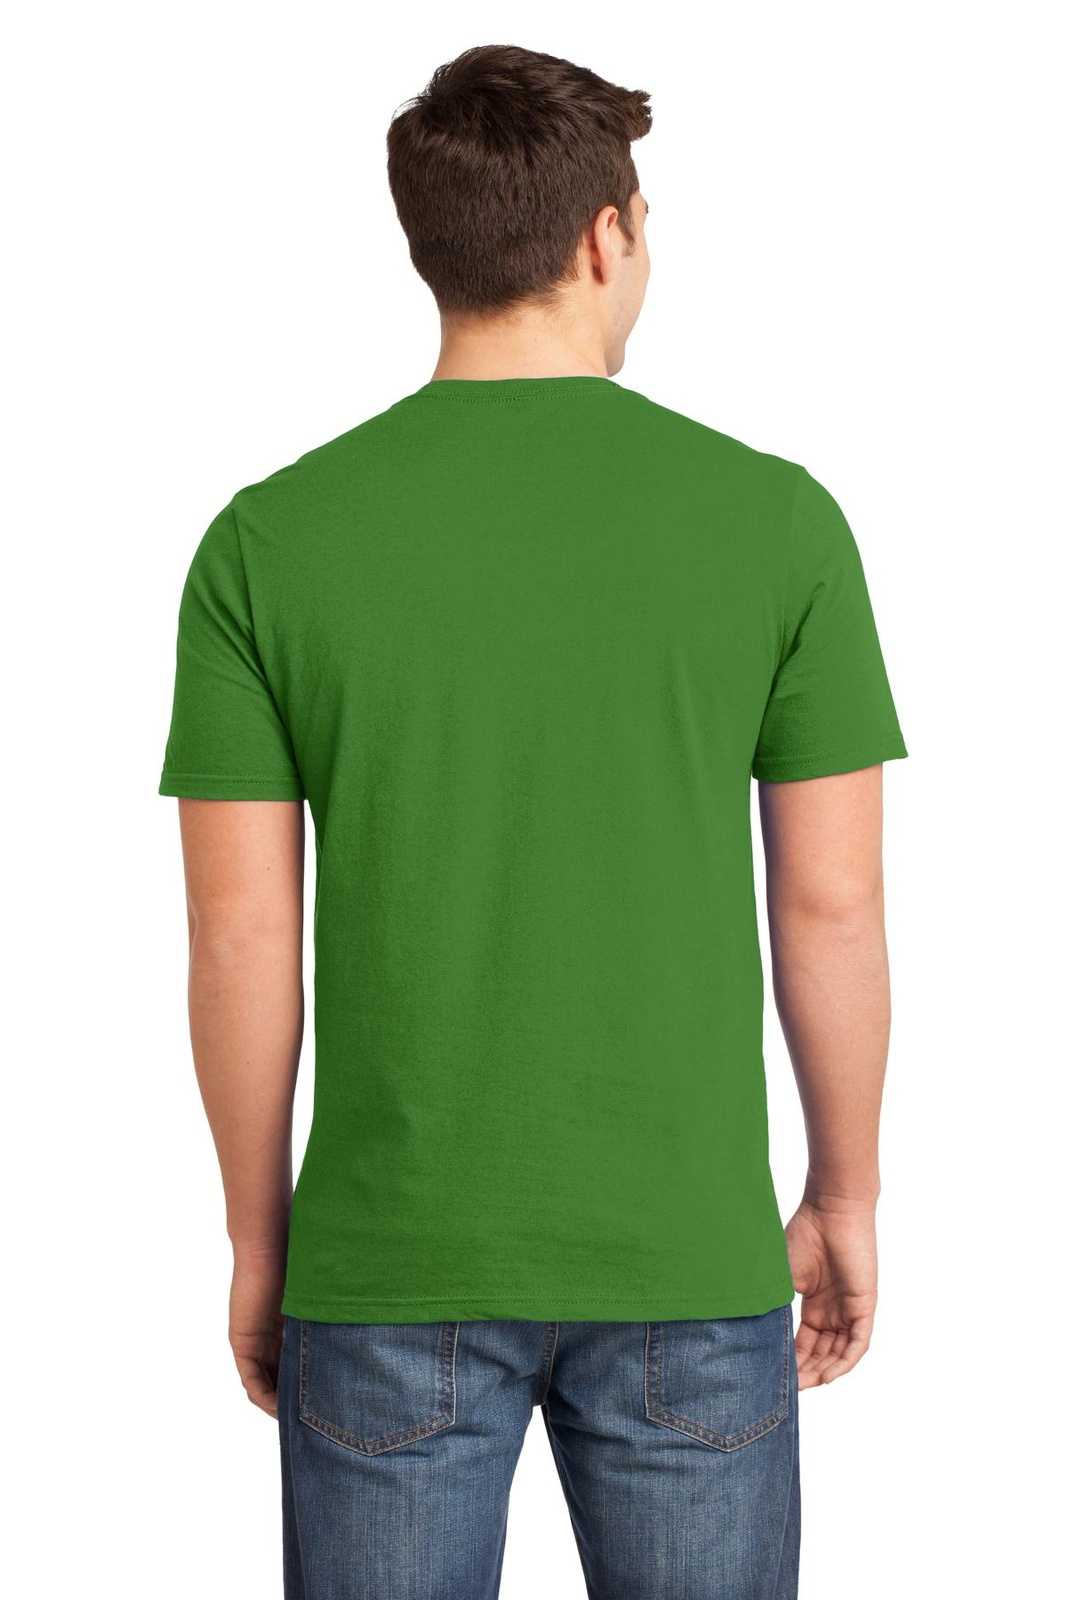 District DT6000 Very Important Tee - Kiwi Green - HIT a Double - 1